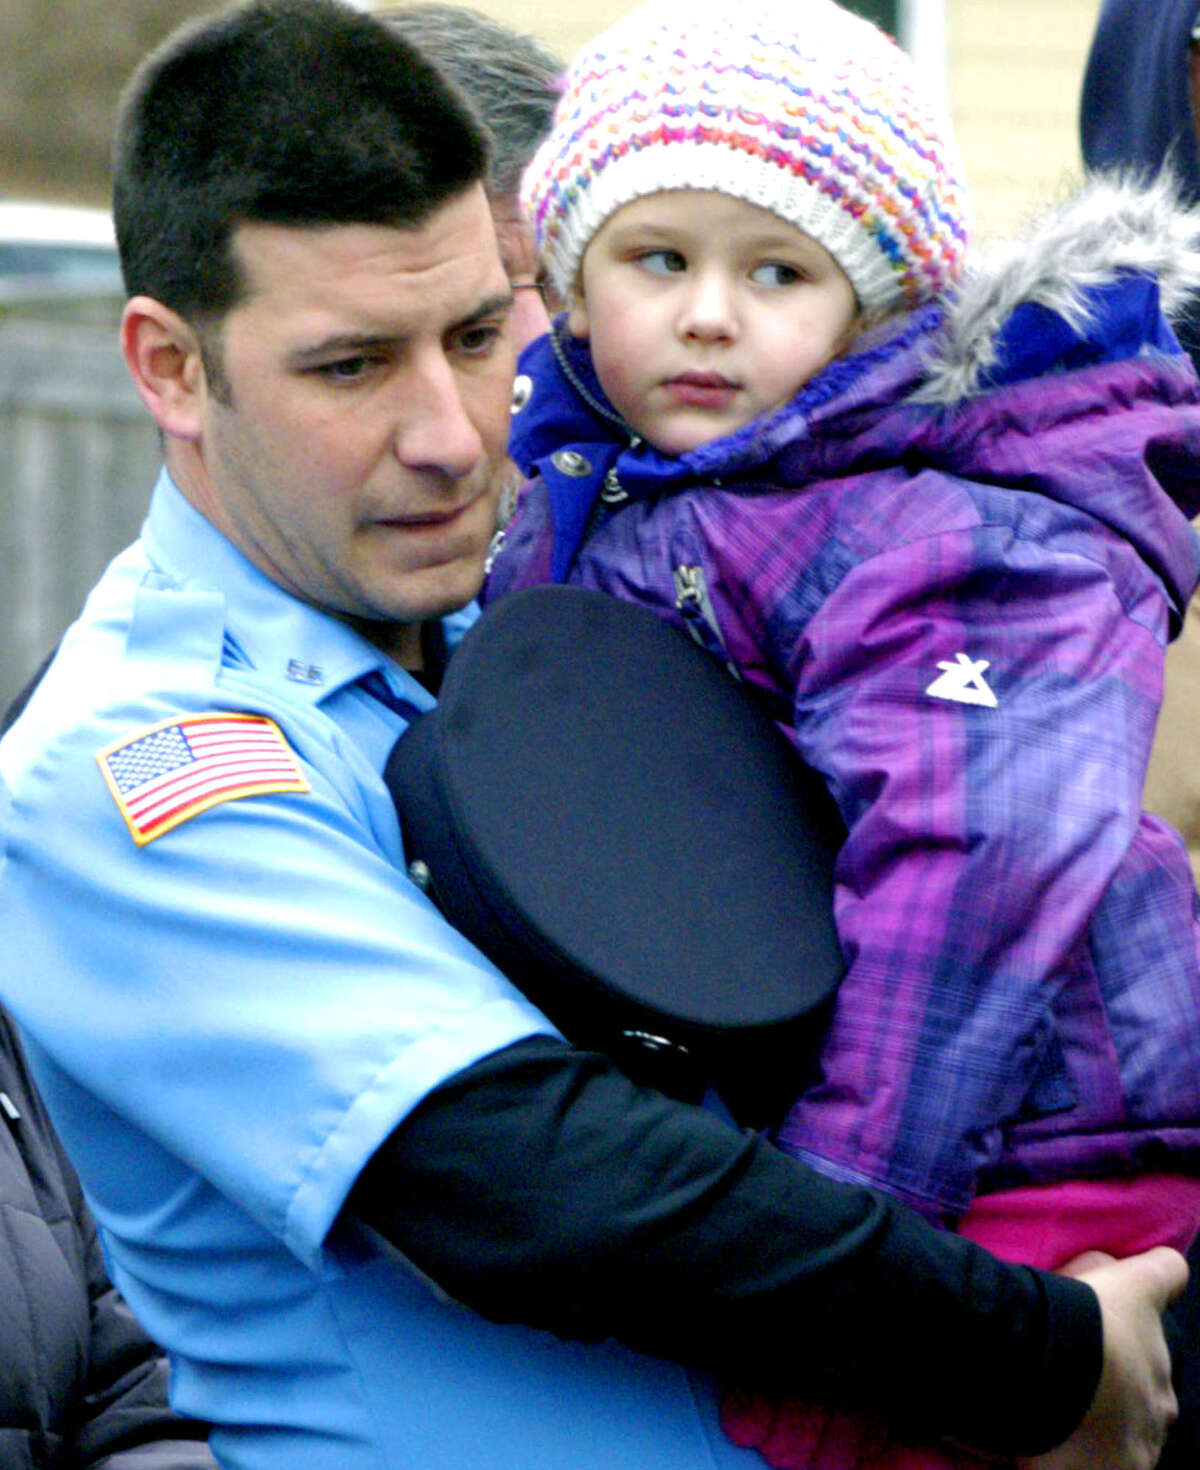 LIfe member Jared Bonner of the Sherman Volunteer Fire Department and his daughter, Mackenzie, are among the hundreds on hand for Sherman's Dec. 8, 2013 festivities celebrating the official opening of the town's emergency services facilty.